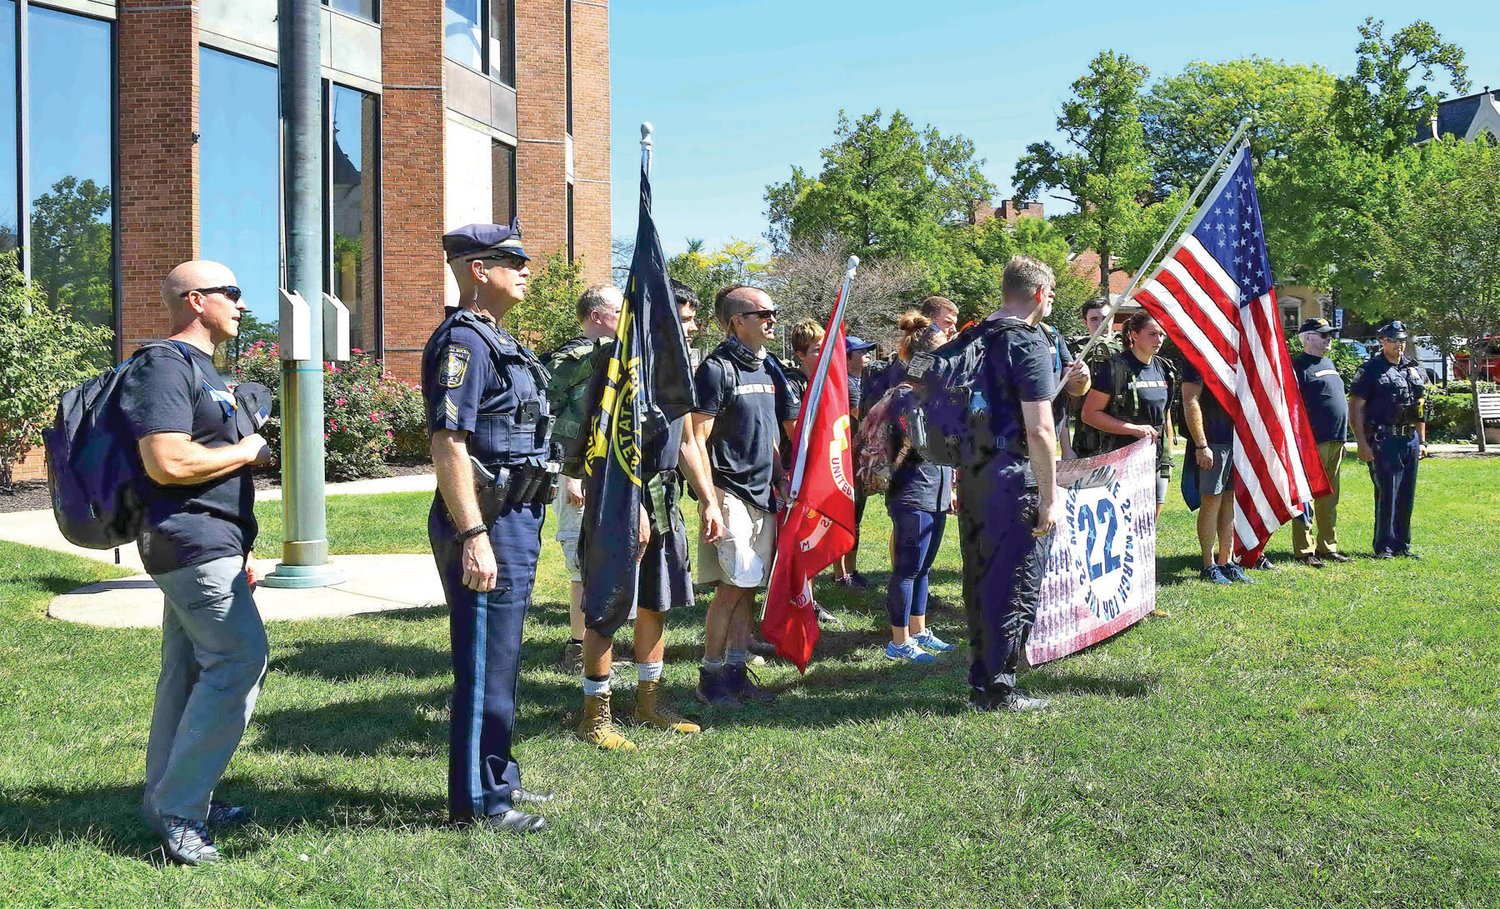 The 22 marchers line up on the Memorial Courtyard.